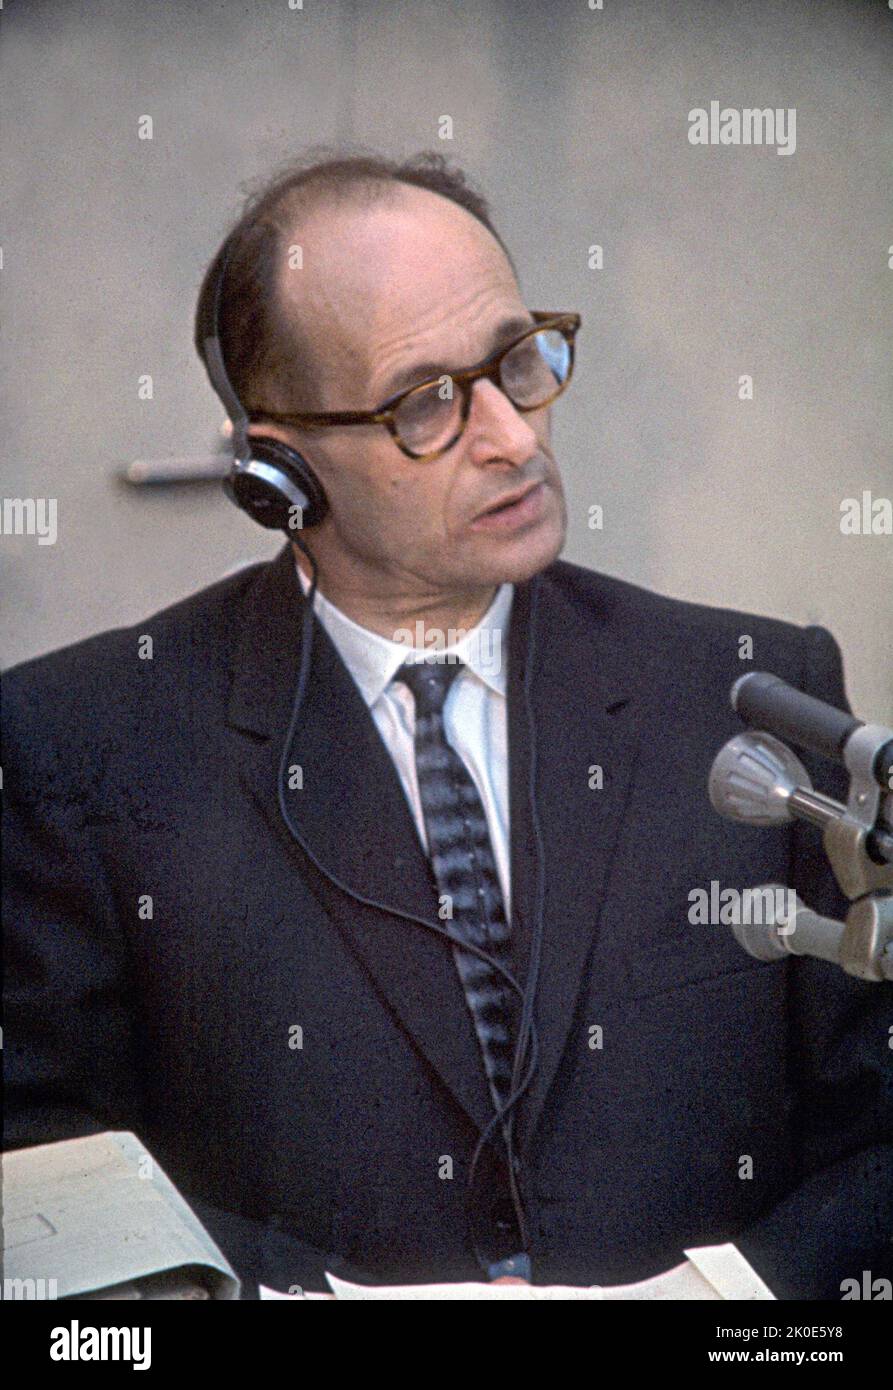 Trial of Adolf Eichmann in Israel 1962. Eichmann (1906 - 1 June 1962) was a German-Austrian SS-Obersturmbannfuhrer and one of the major organisers of the Holocaust (the 'Final Solution to the Jewish Question' in Nazi terminology). Eichmann was found guilty of war crimes in a widely publicised trial in Jerusalem, where he was executed by hanging in 1962. Stock Photo